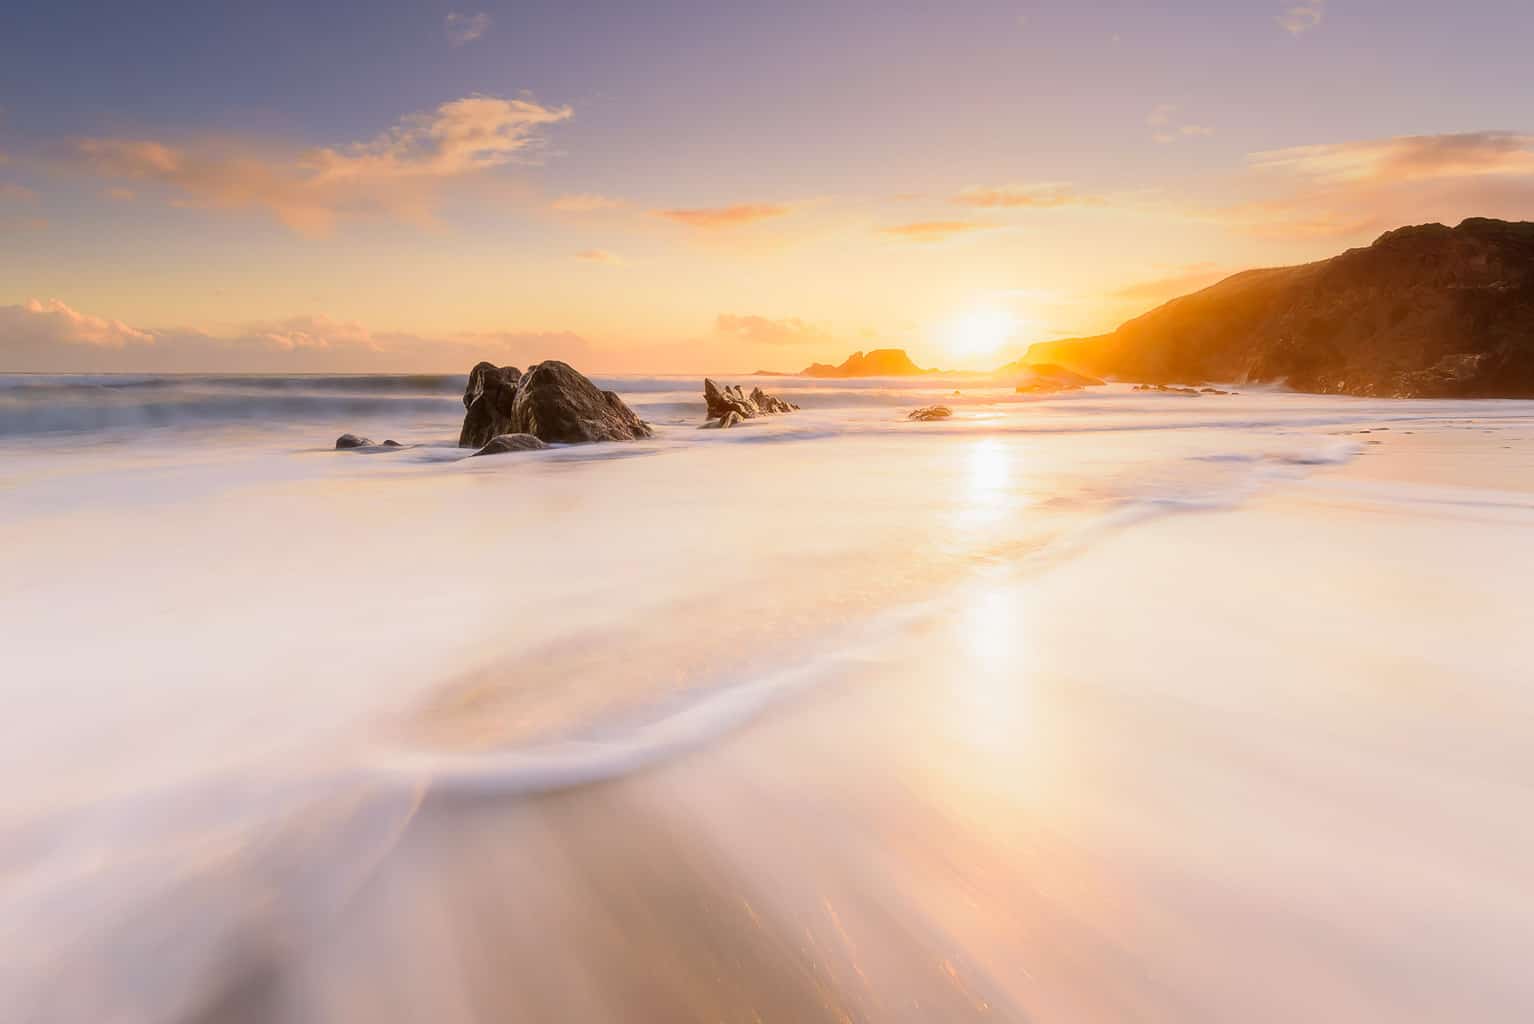 Seascape Photography tips and tricks